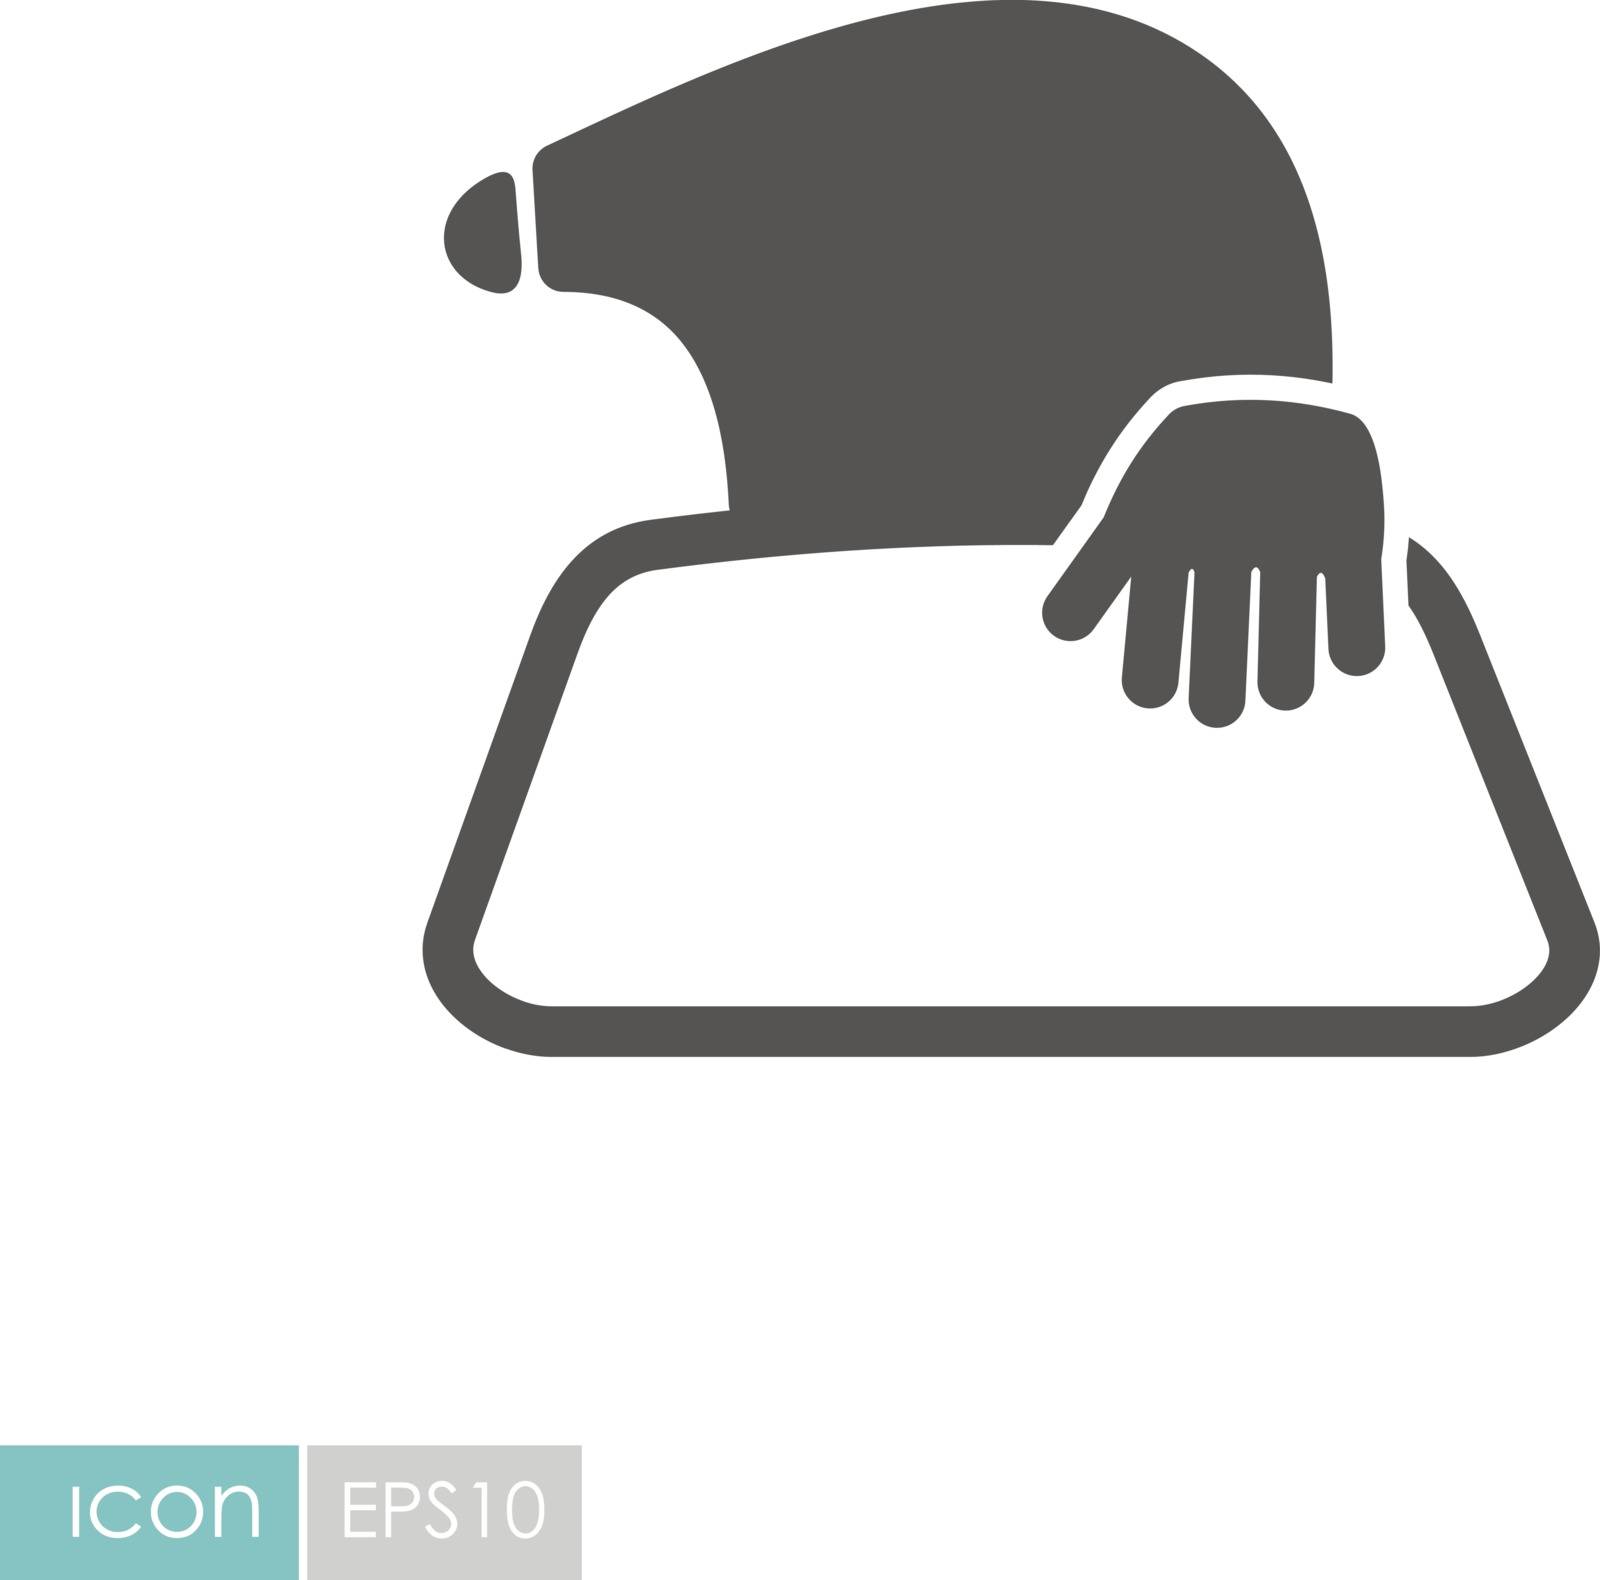 Mole icon for garden craft by nosik